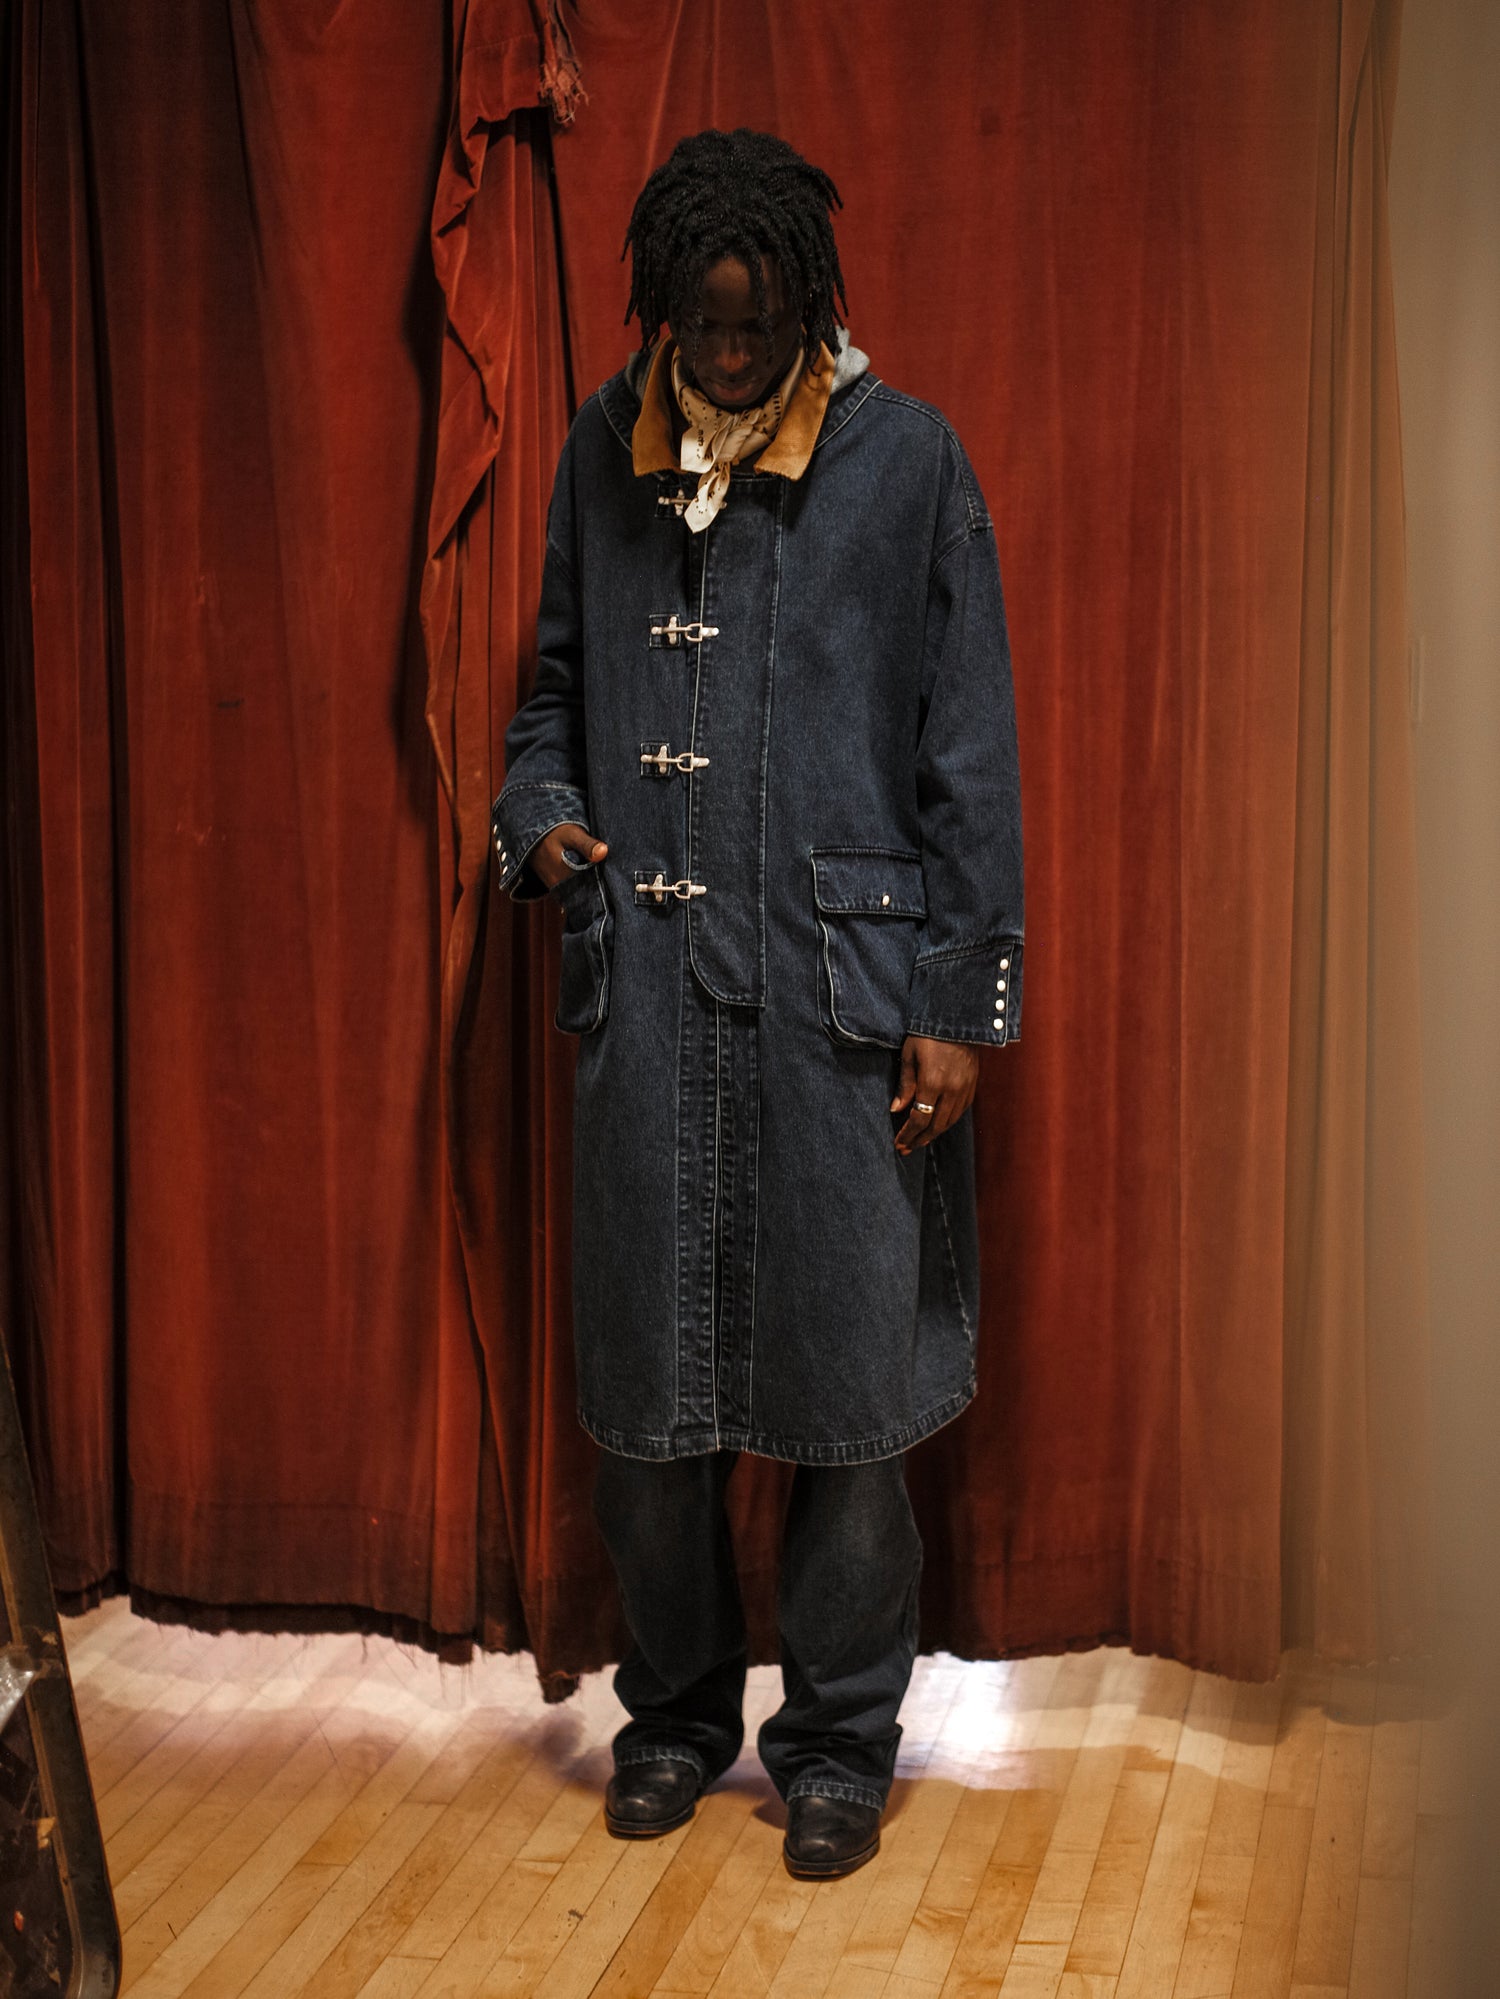 A man in a vintage fireman coat, the Found Sargasso Denim Buckle coat, standing in front of a red curtain.